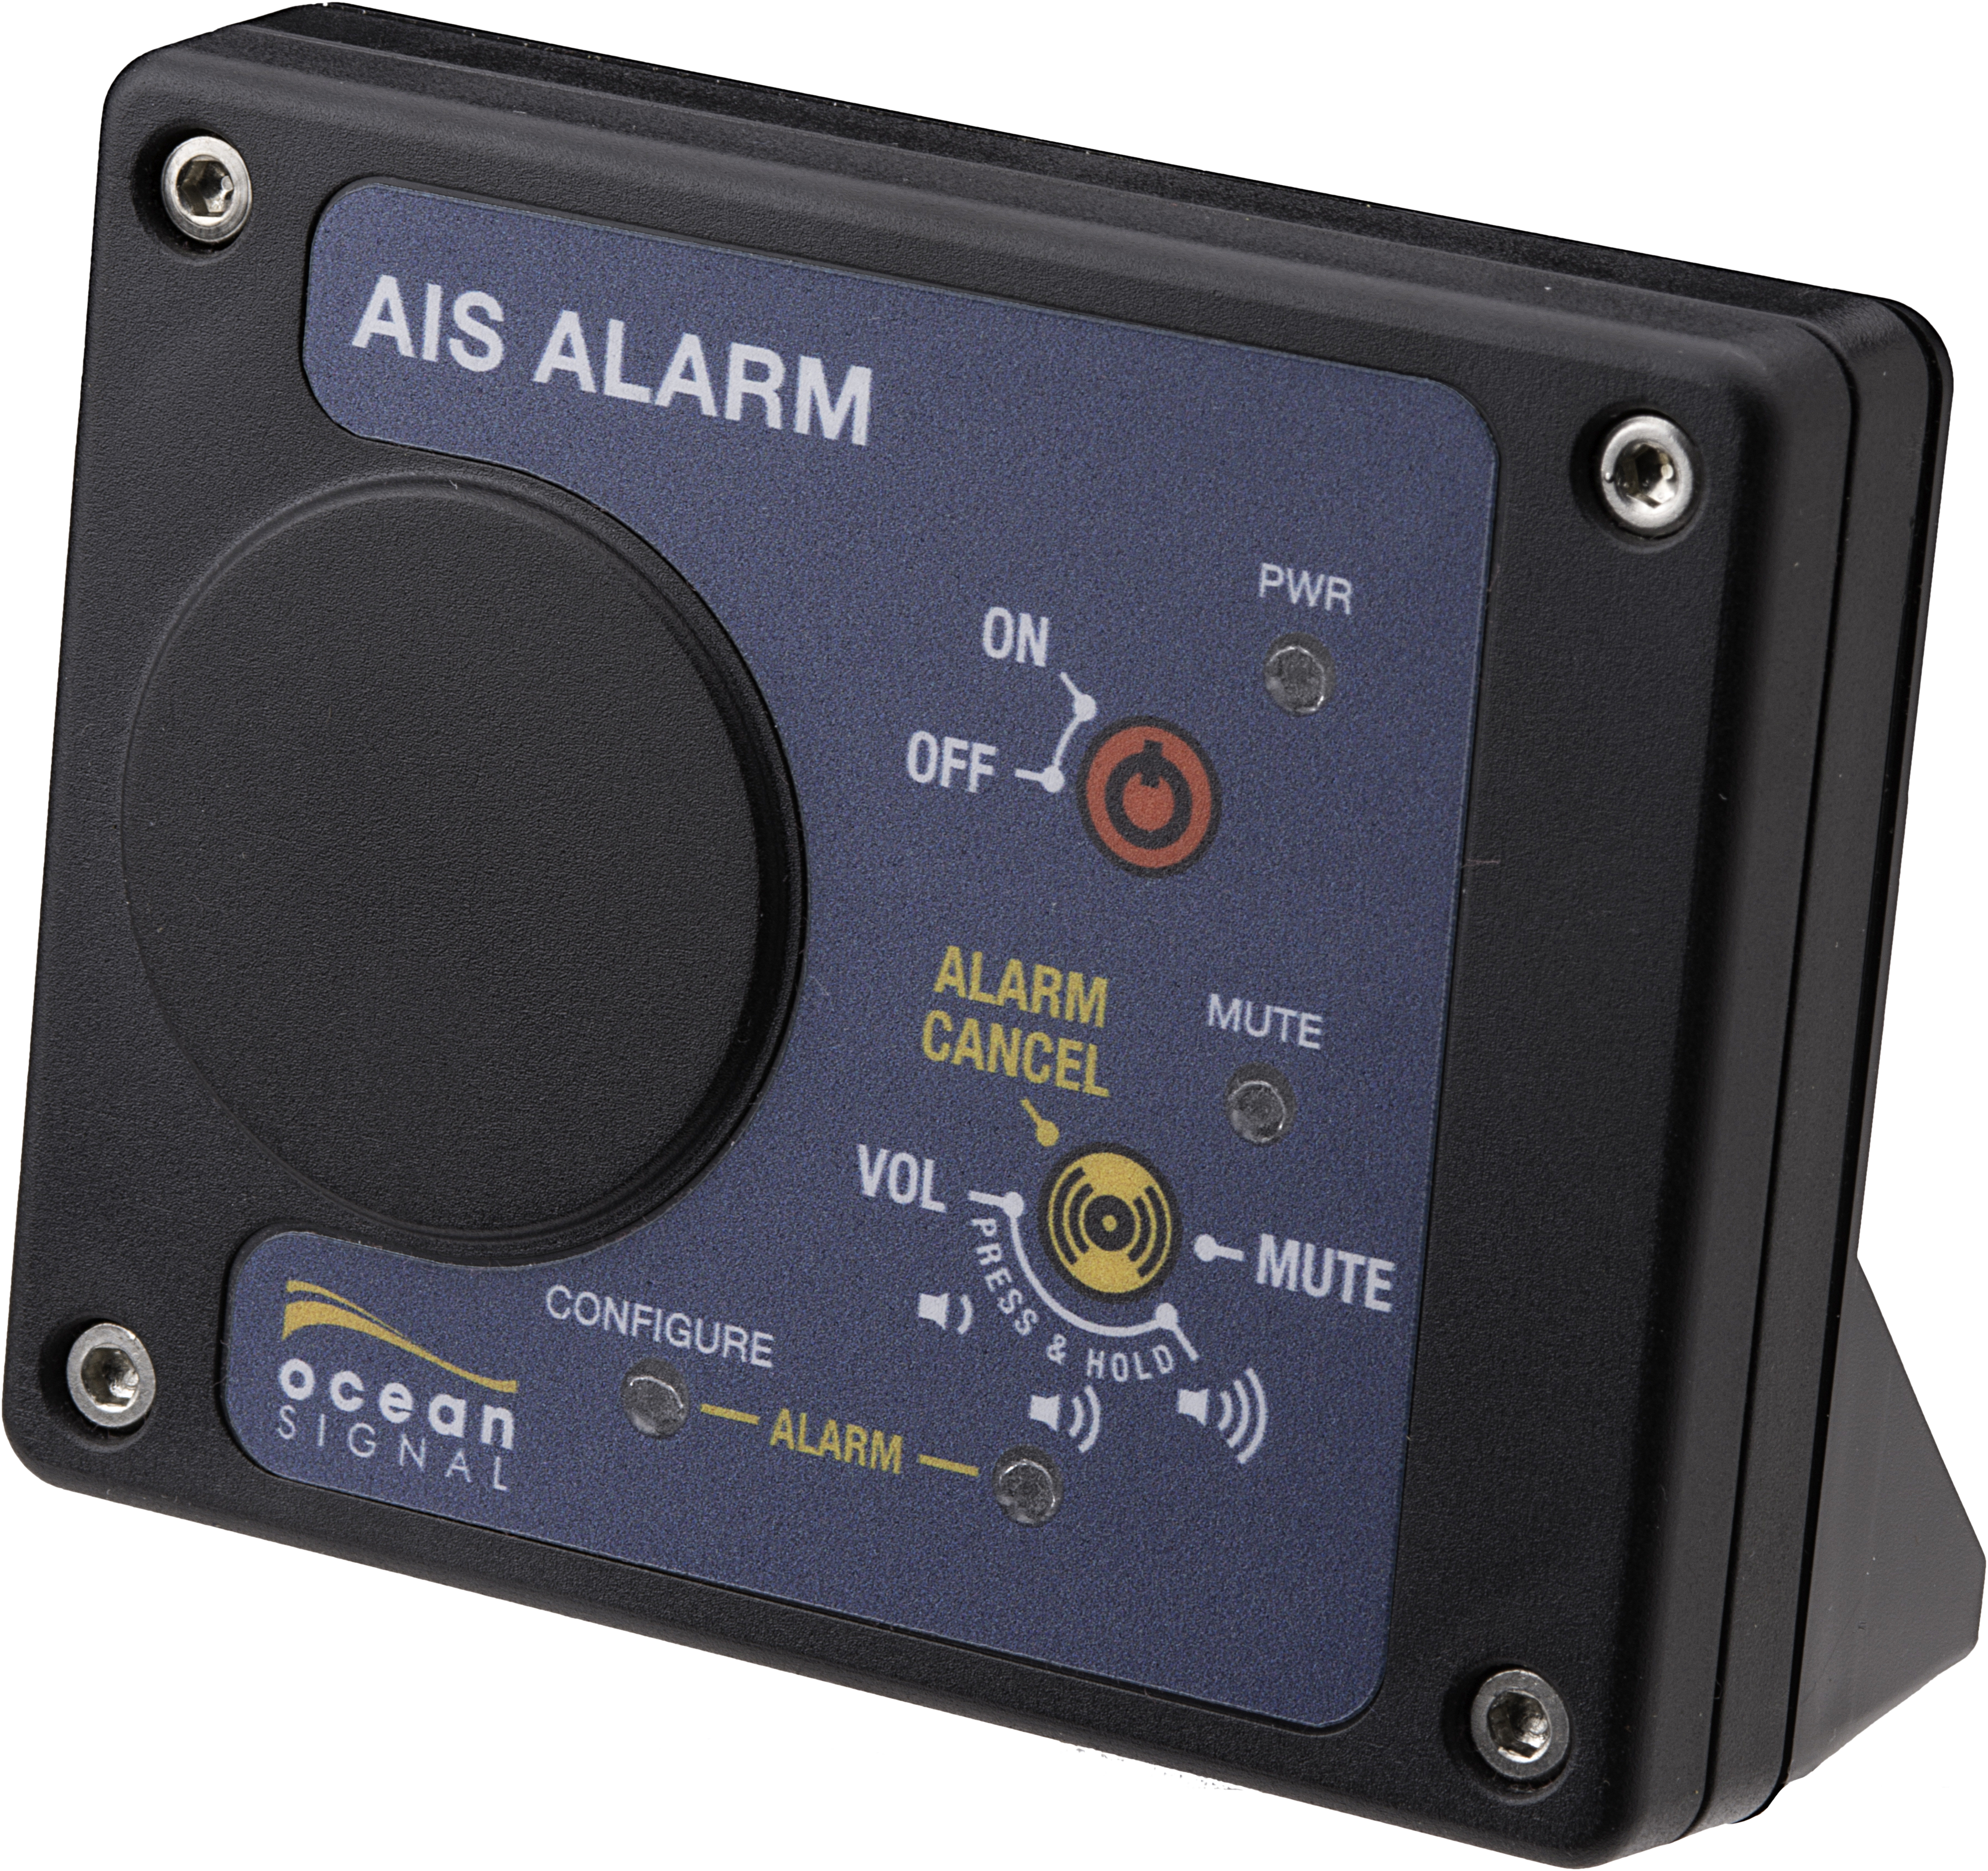 AIS Alarm front angled